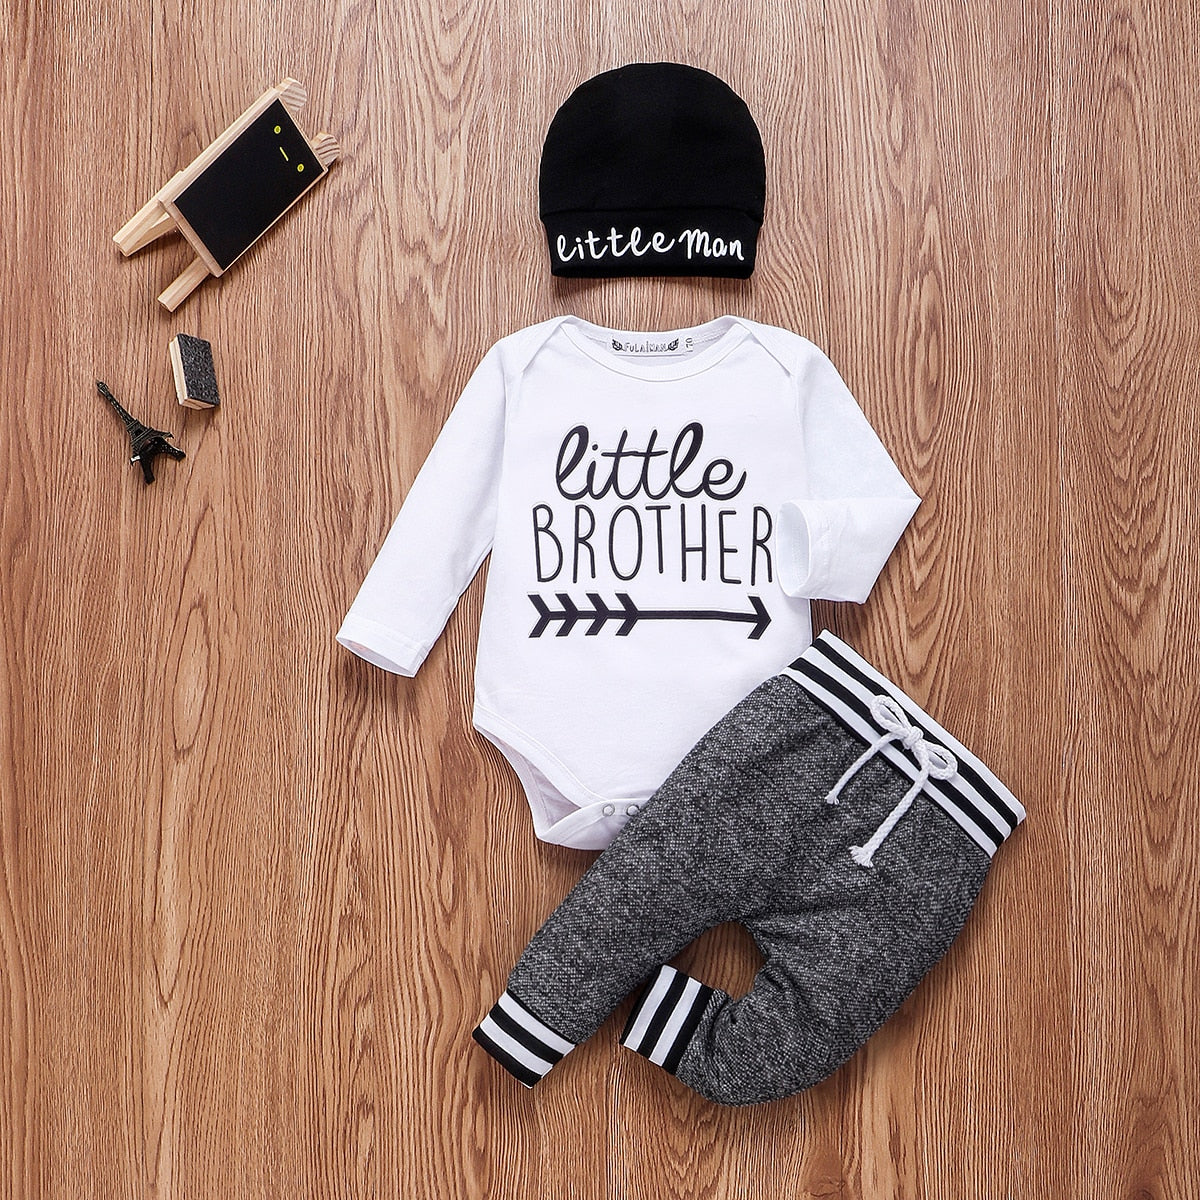 BABABYBU Baby Boy Clothes Sets 3pcs Little Brother